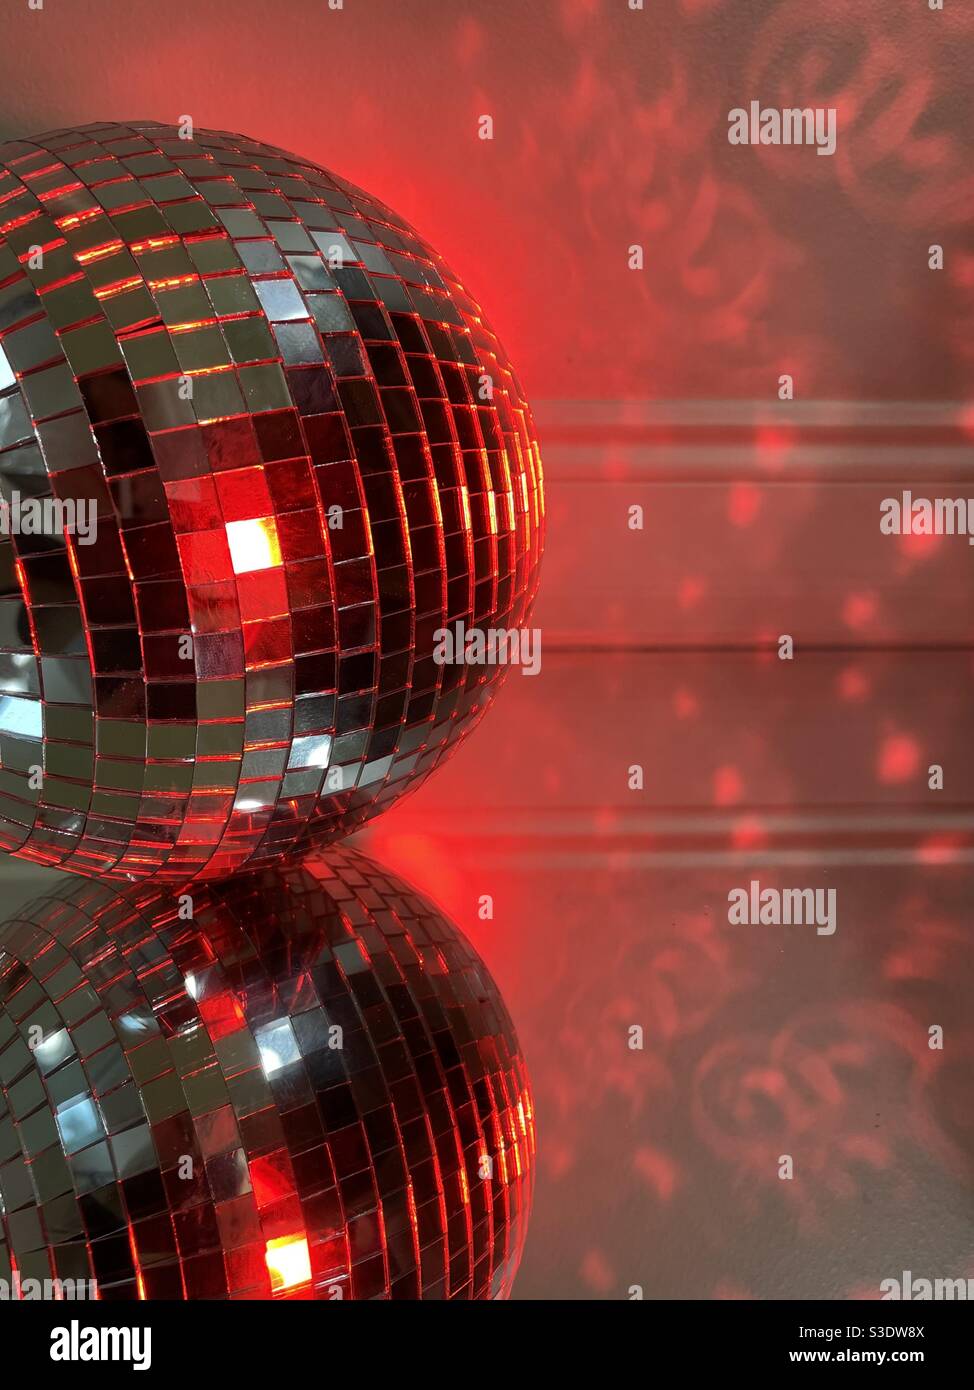 Disco ball with red lighting on mirrored surface with reflections Stock Photo